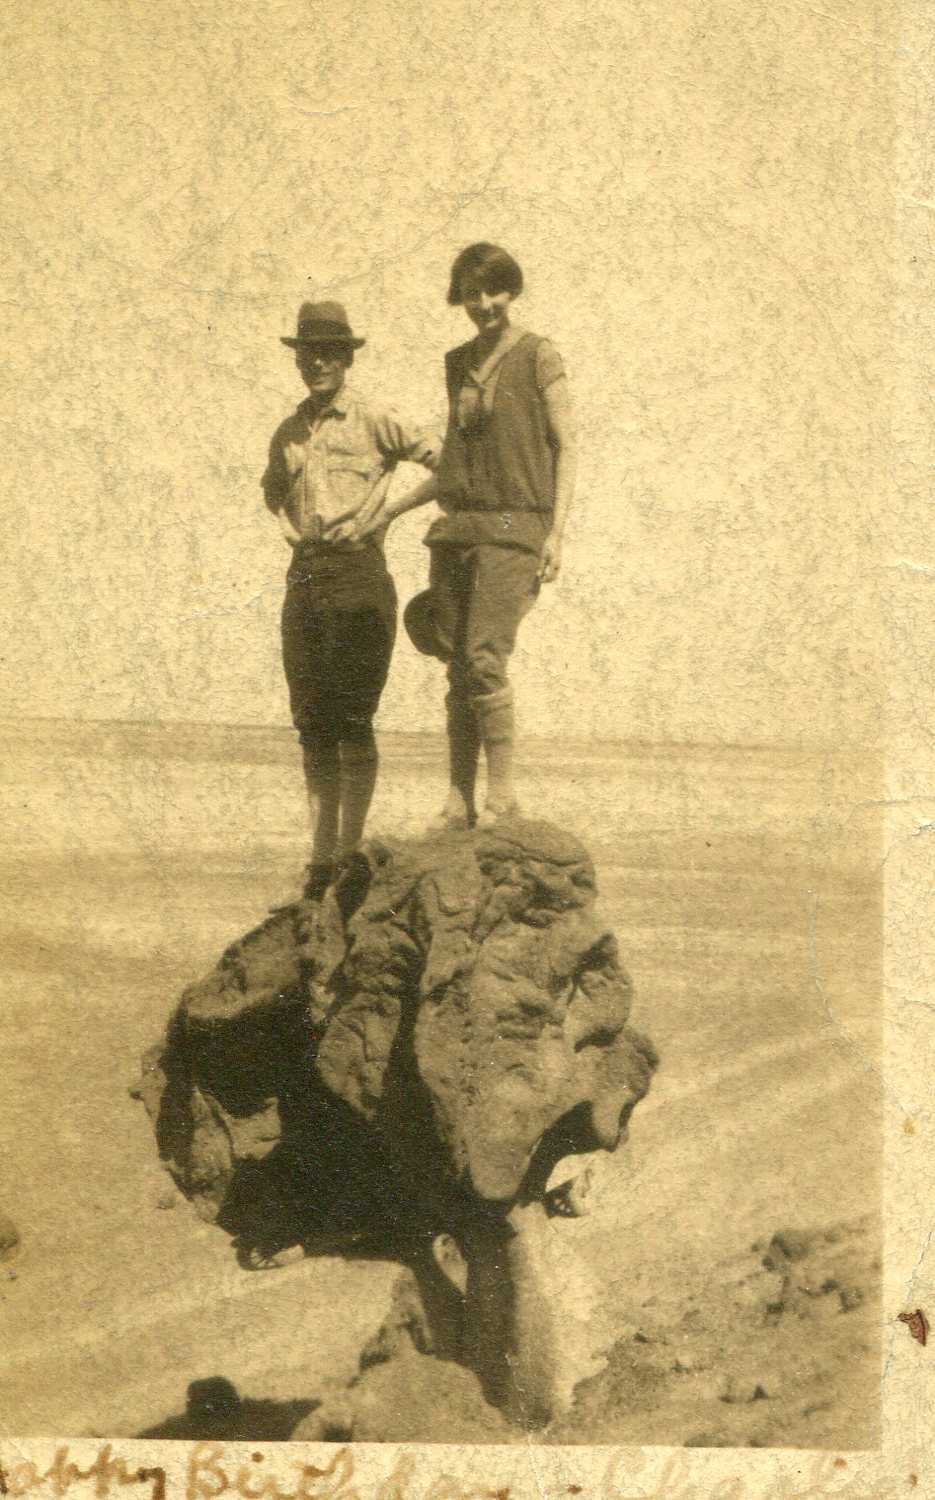 A yellowing photo of Arnold and Mabel Beckman standing on a large boulder in an otherwise barren landscape. Mabel is notably wearing trousers.